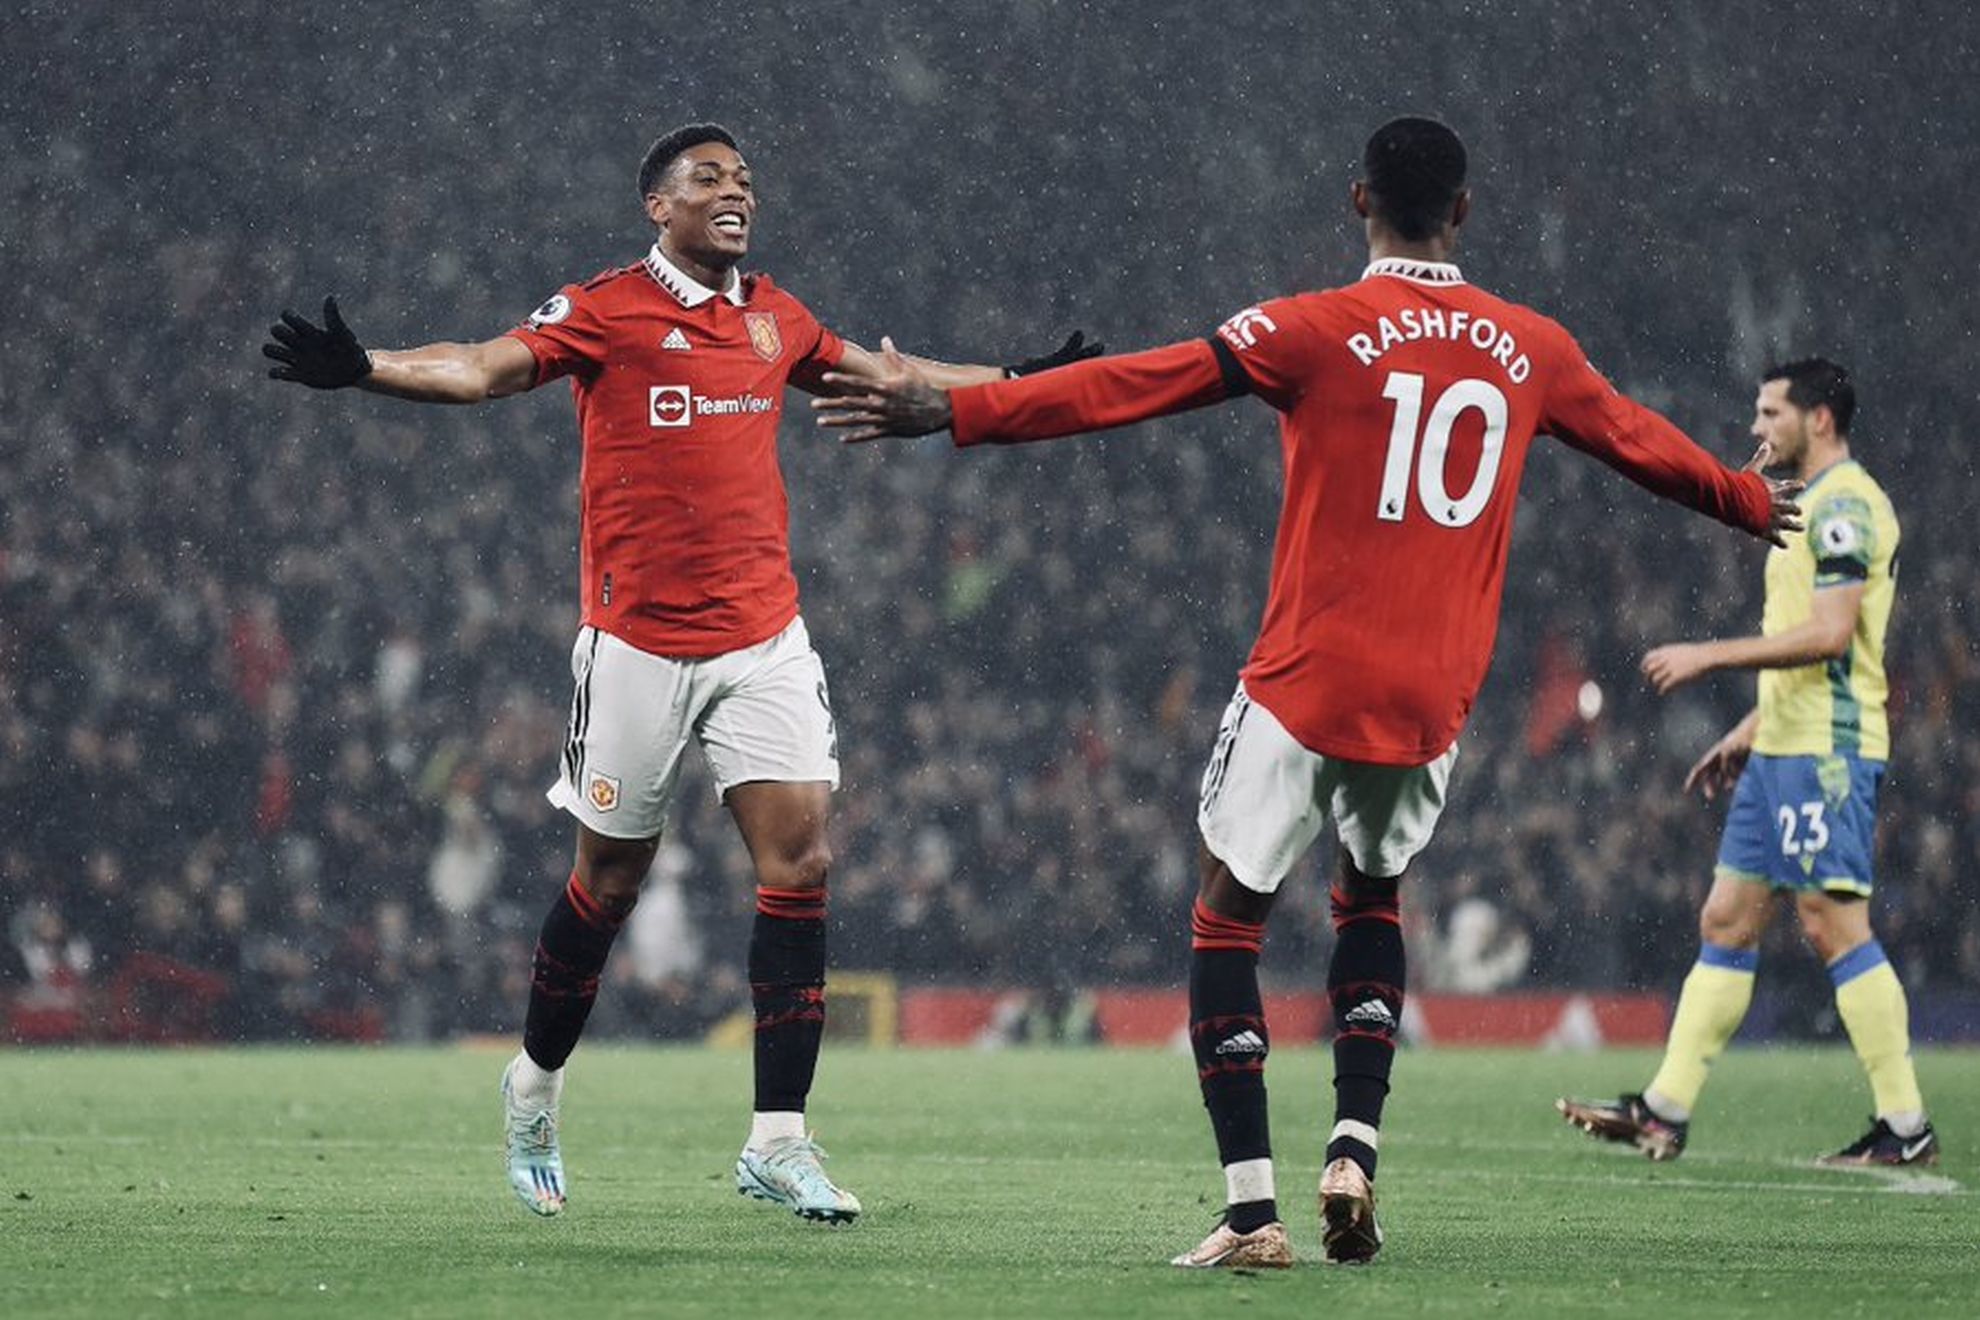 Man Utd vs Nottingham Forest | Premier League: Manchester United close in  on top four after downing Nottingham Forest - Premier League